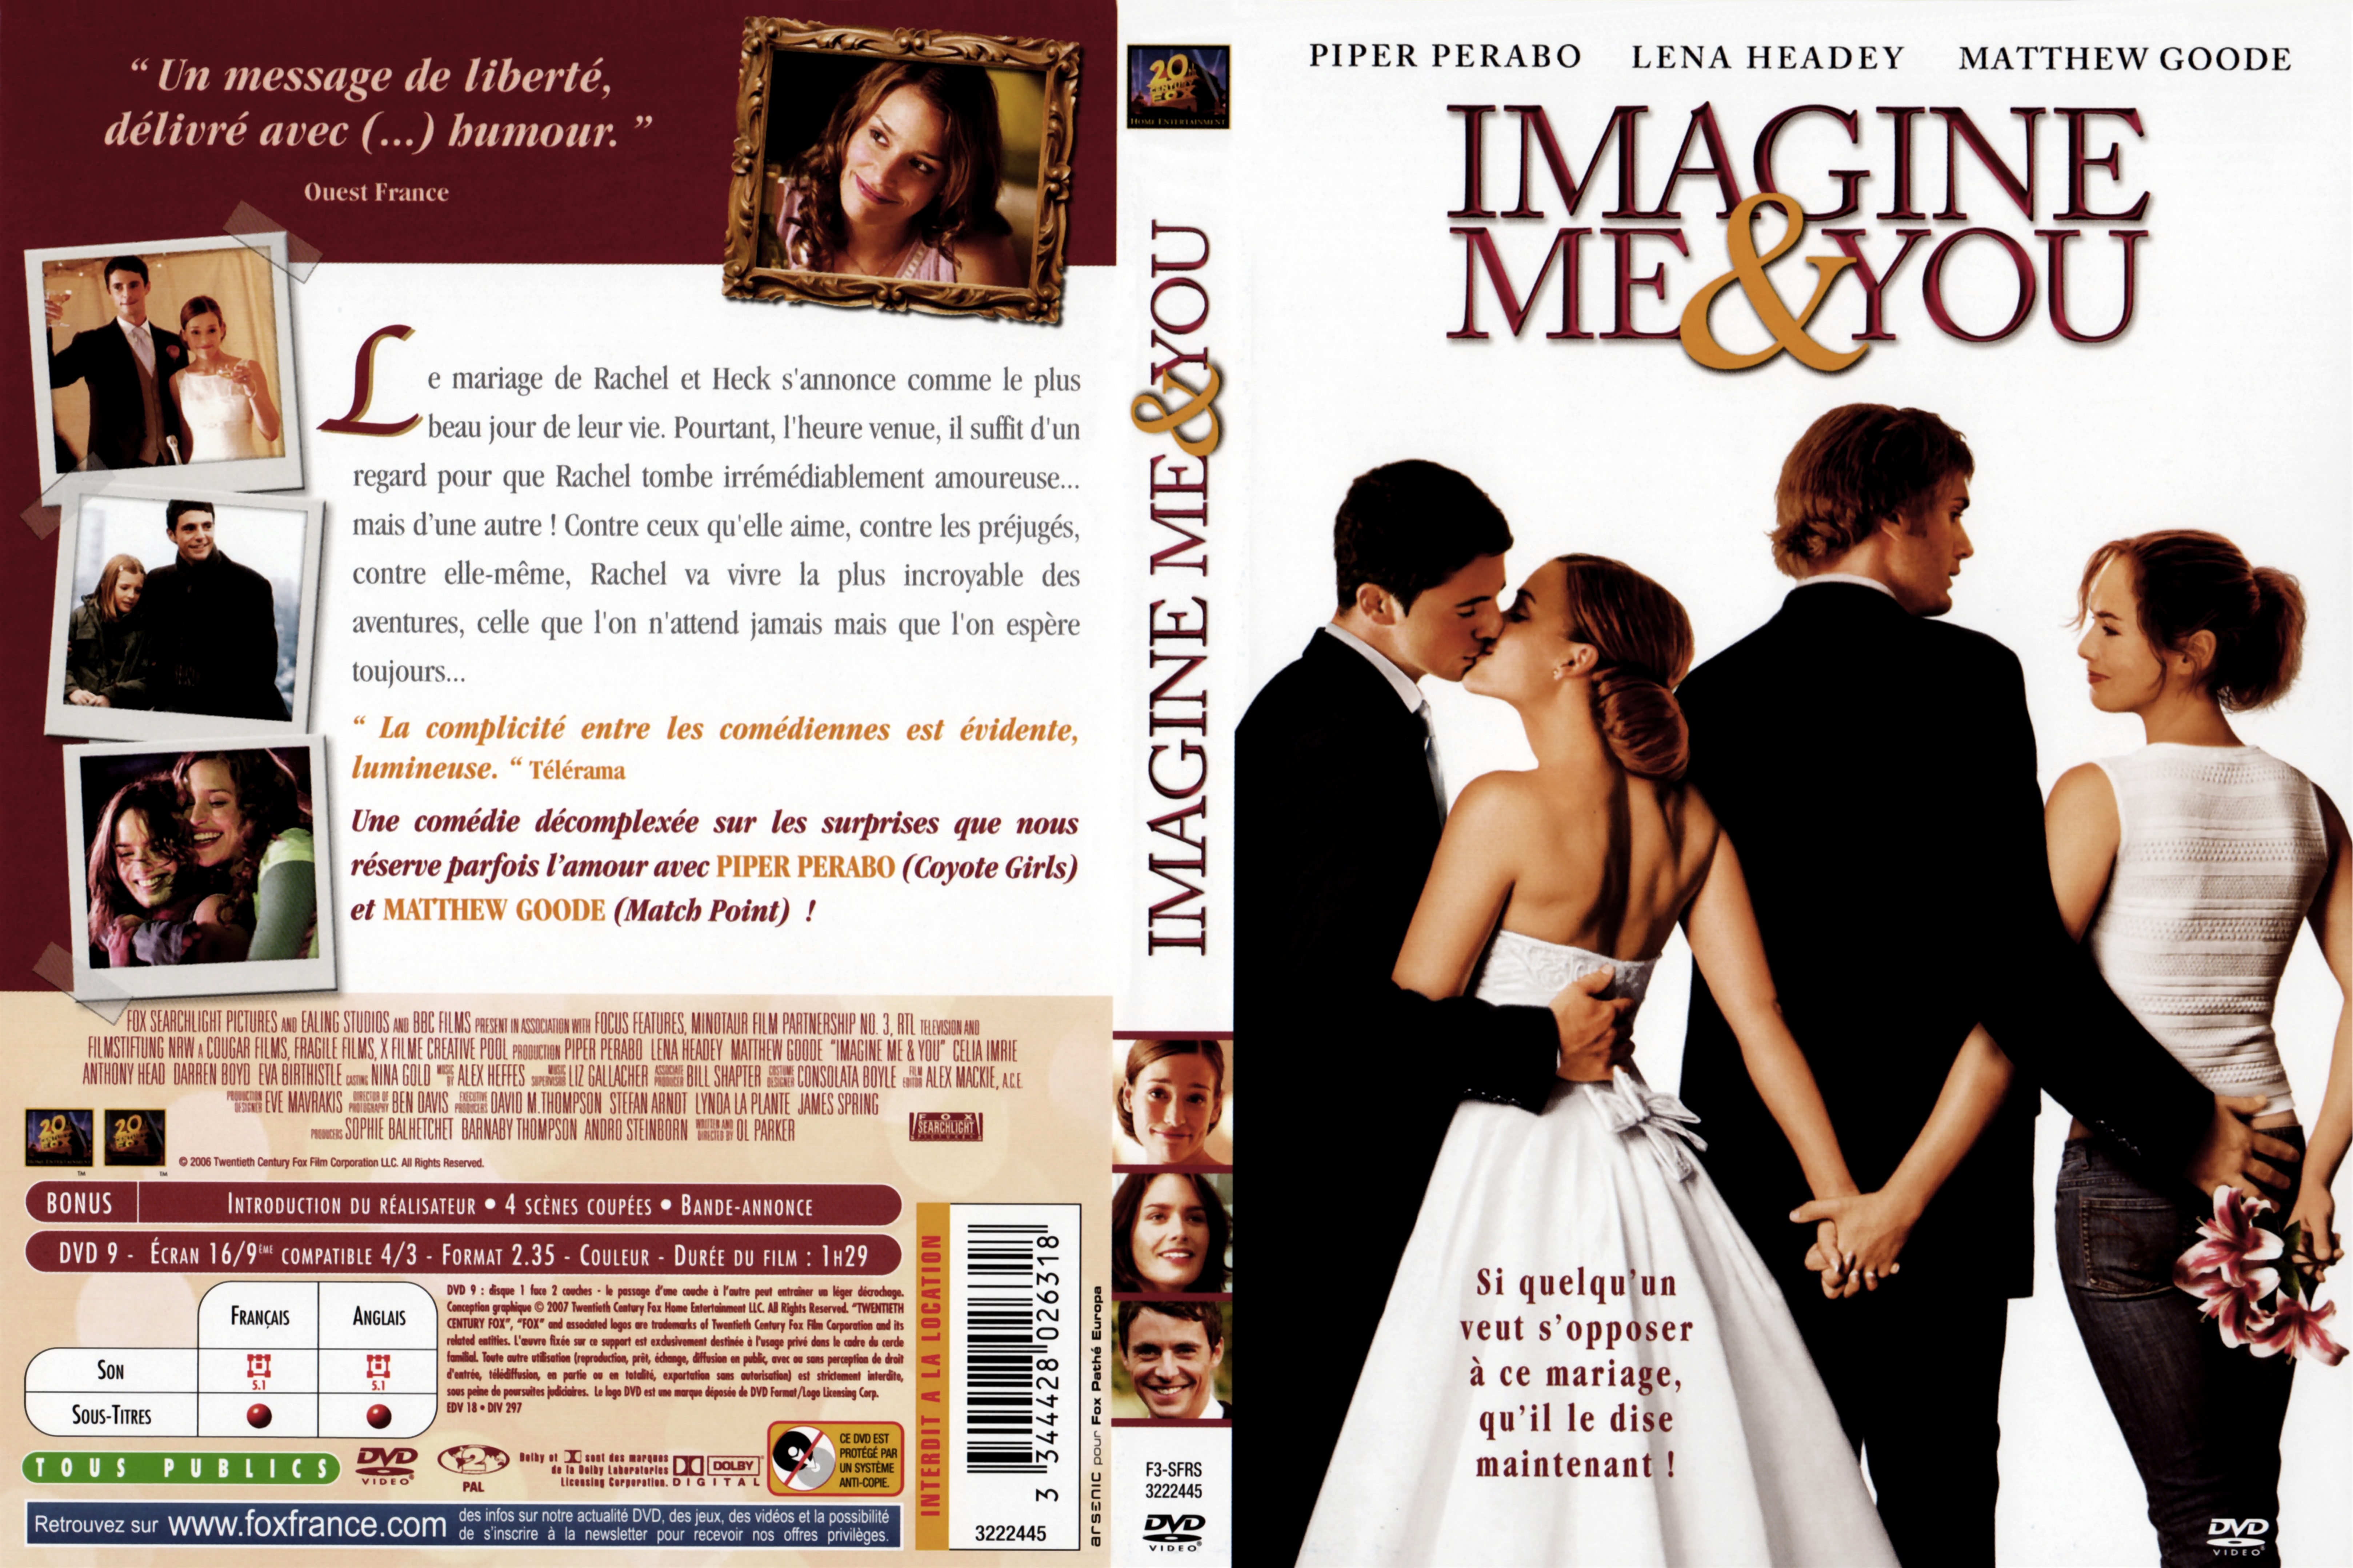 Jaquette DVD Imagine me and you v2